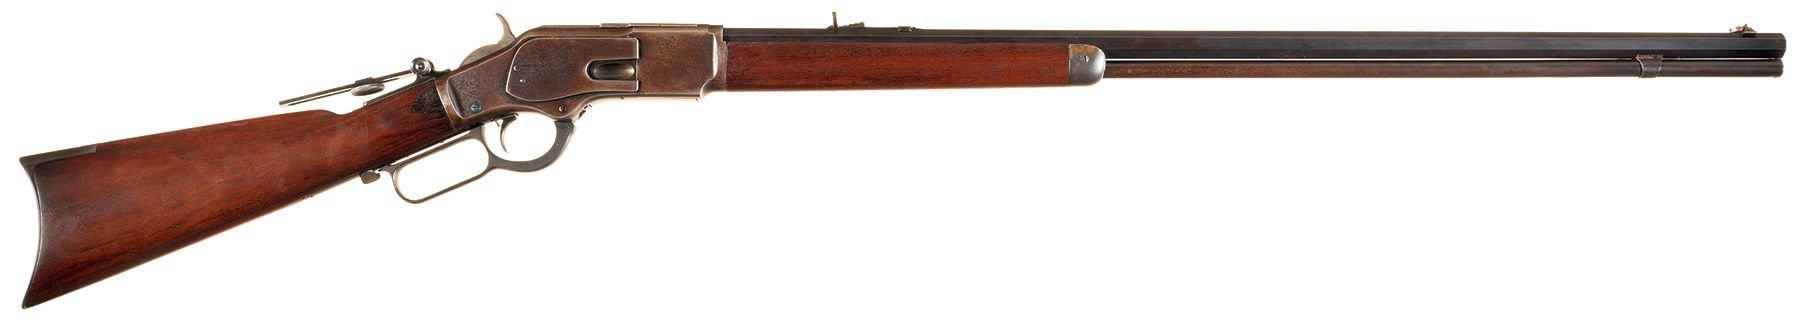 Winchester Model 1873 Rifle with Special Features